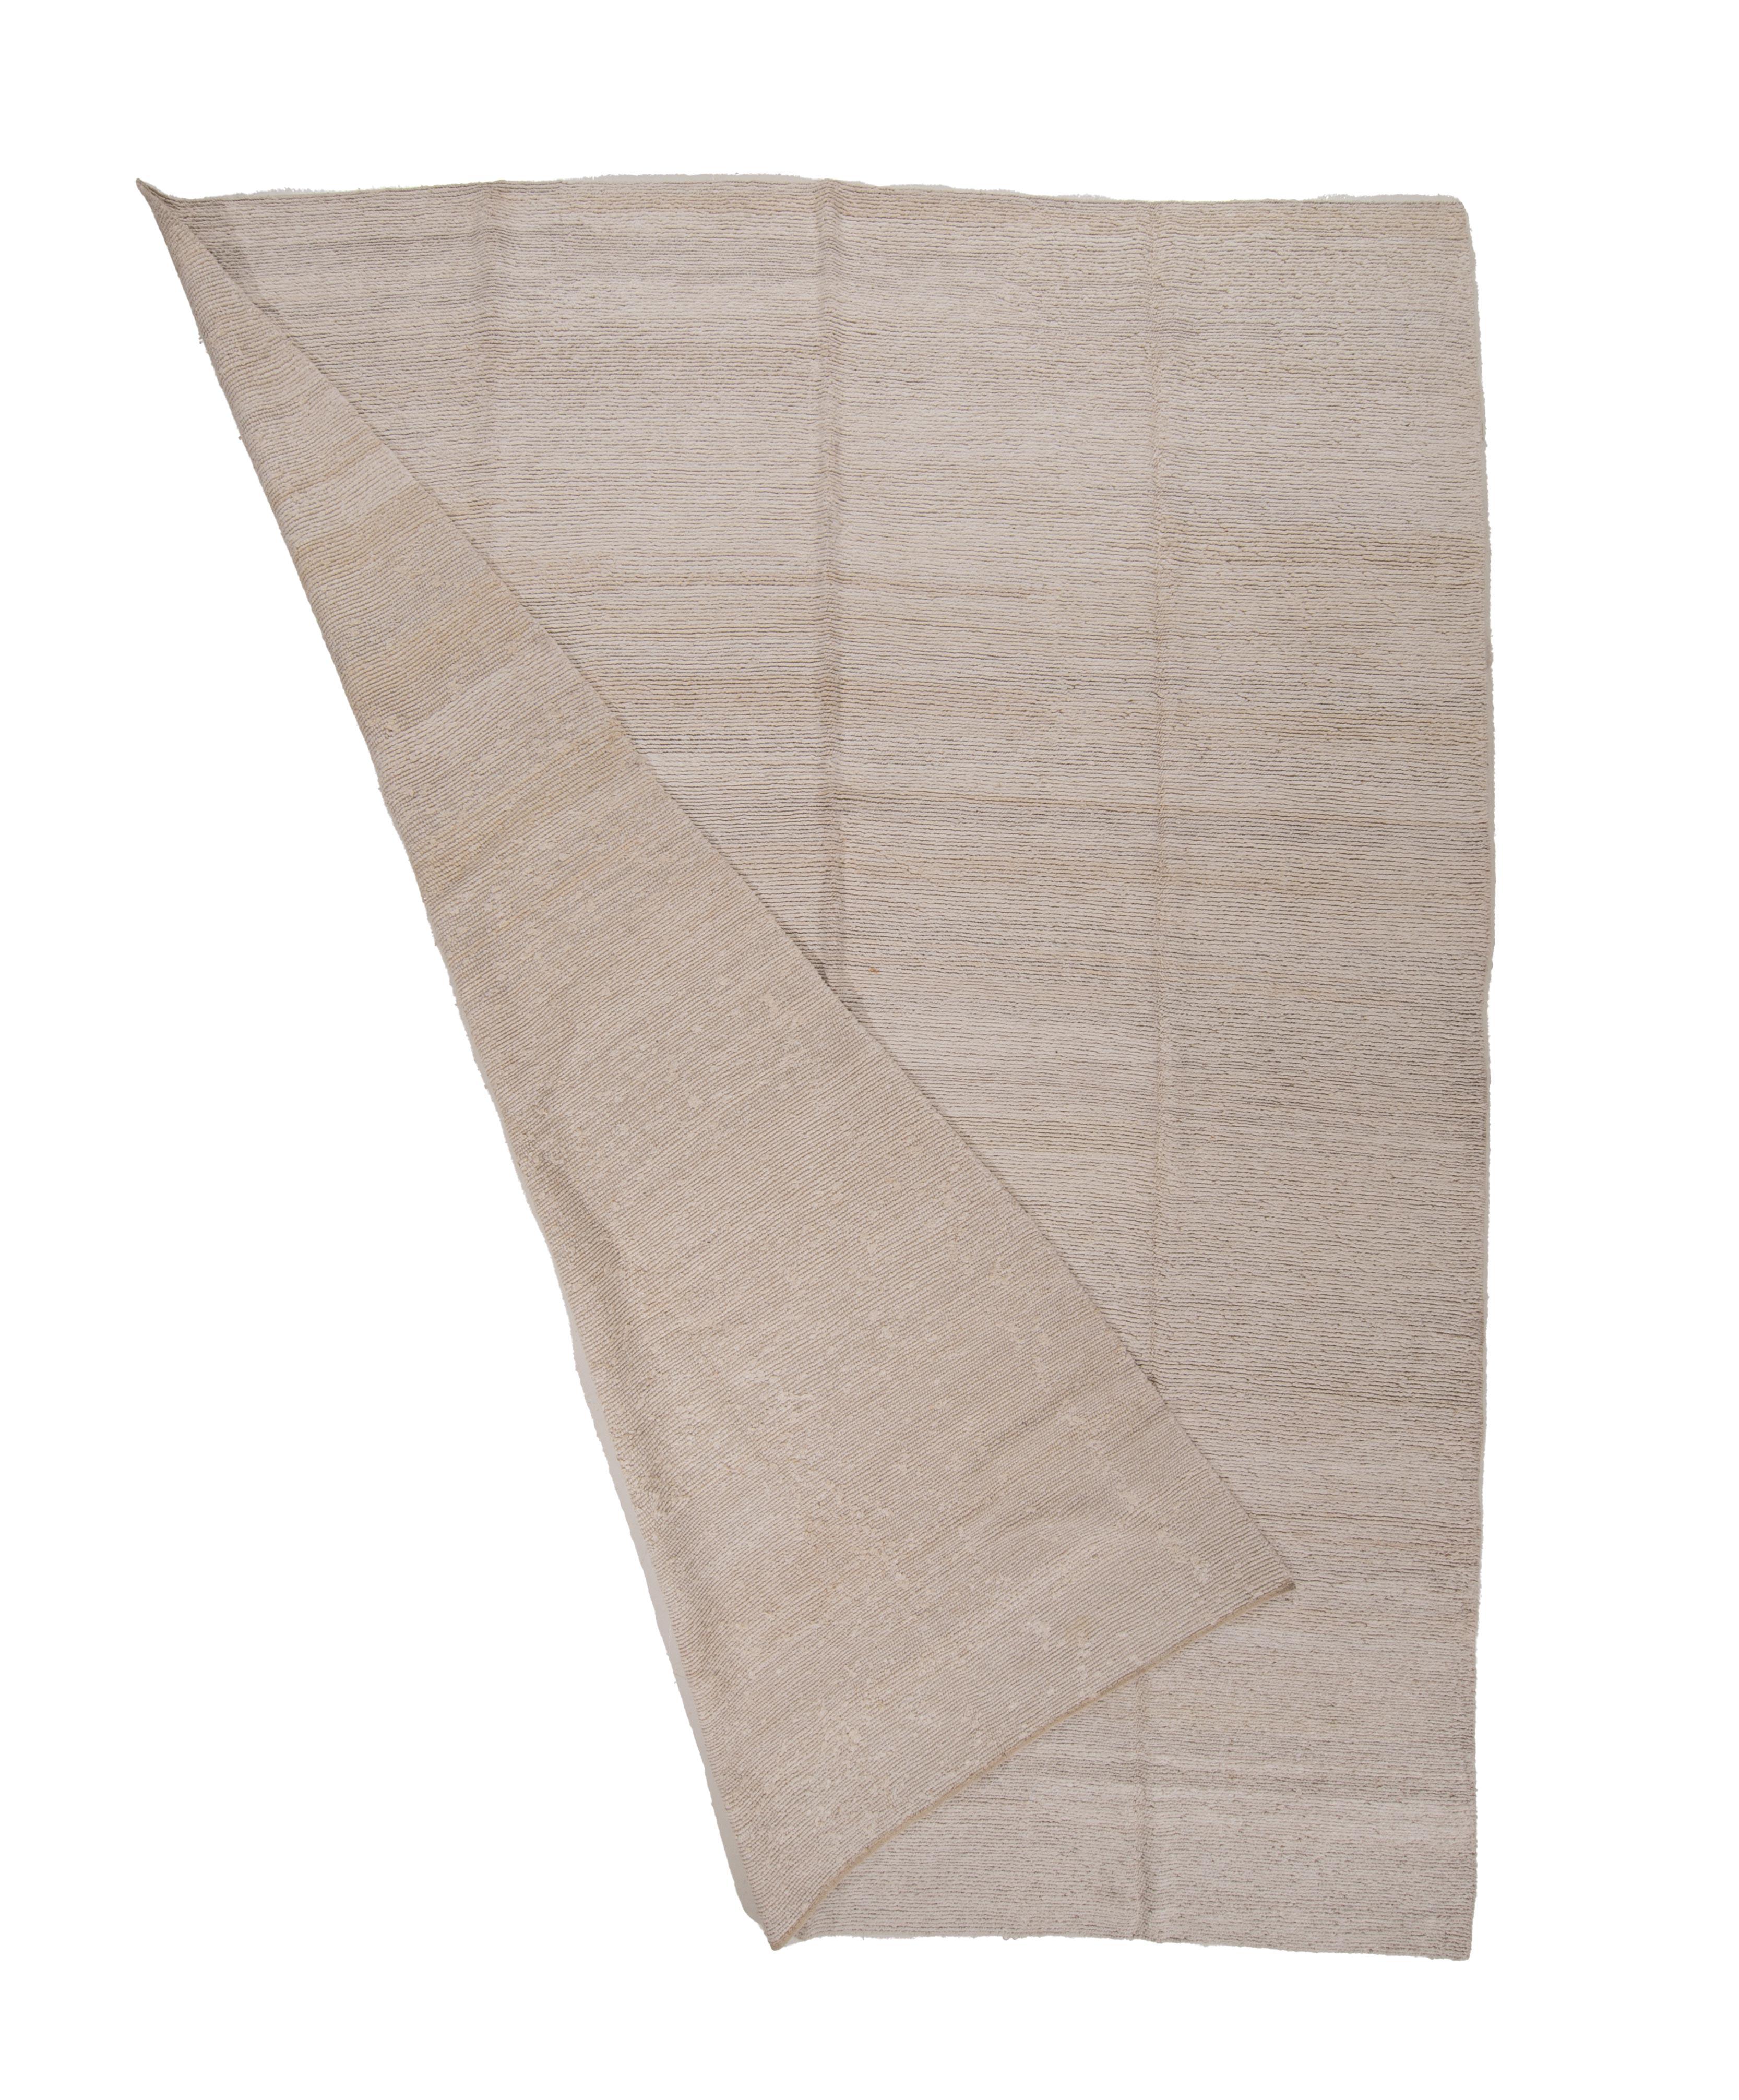 Hand-Woven Contemporary Turkish Large Sumak Rug Made with Recycled Hemp